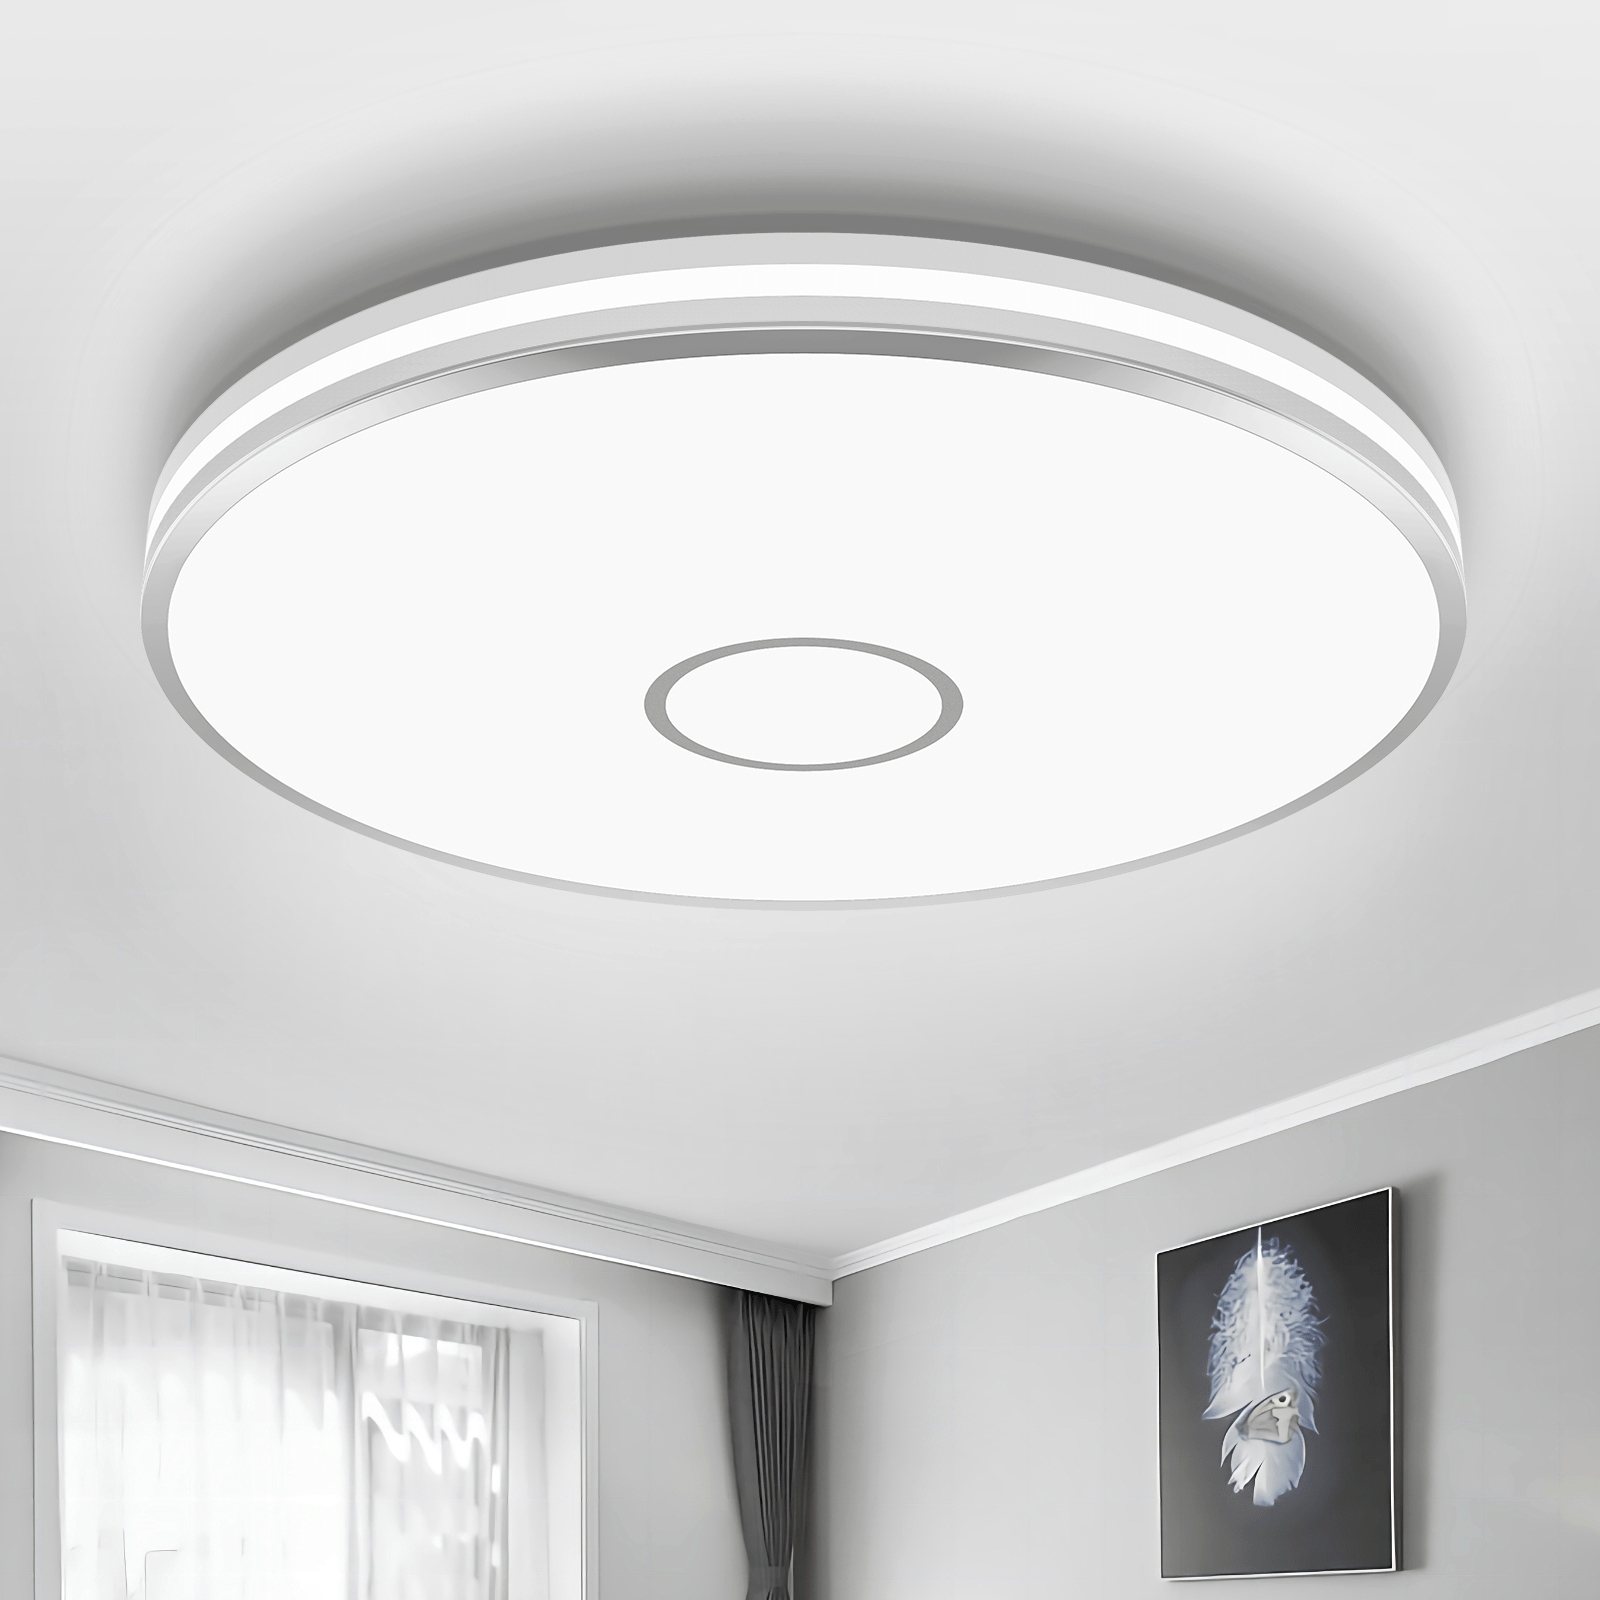 Upgrade Your Space with an Ultra-Bright 15-Inch Square LED Flush Mount Ceiling Light - 40W, 3800 Lumens, 5000K Daylight, Energy-Efficient, and IP44 Waterproof for Versatile, Sleek Design - Eco LED Lightings 